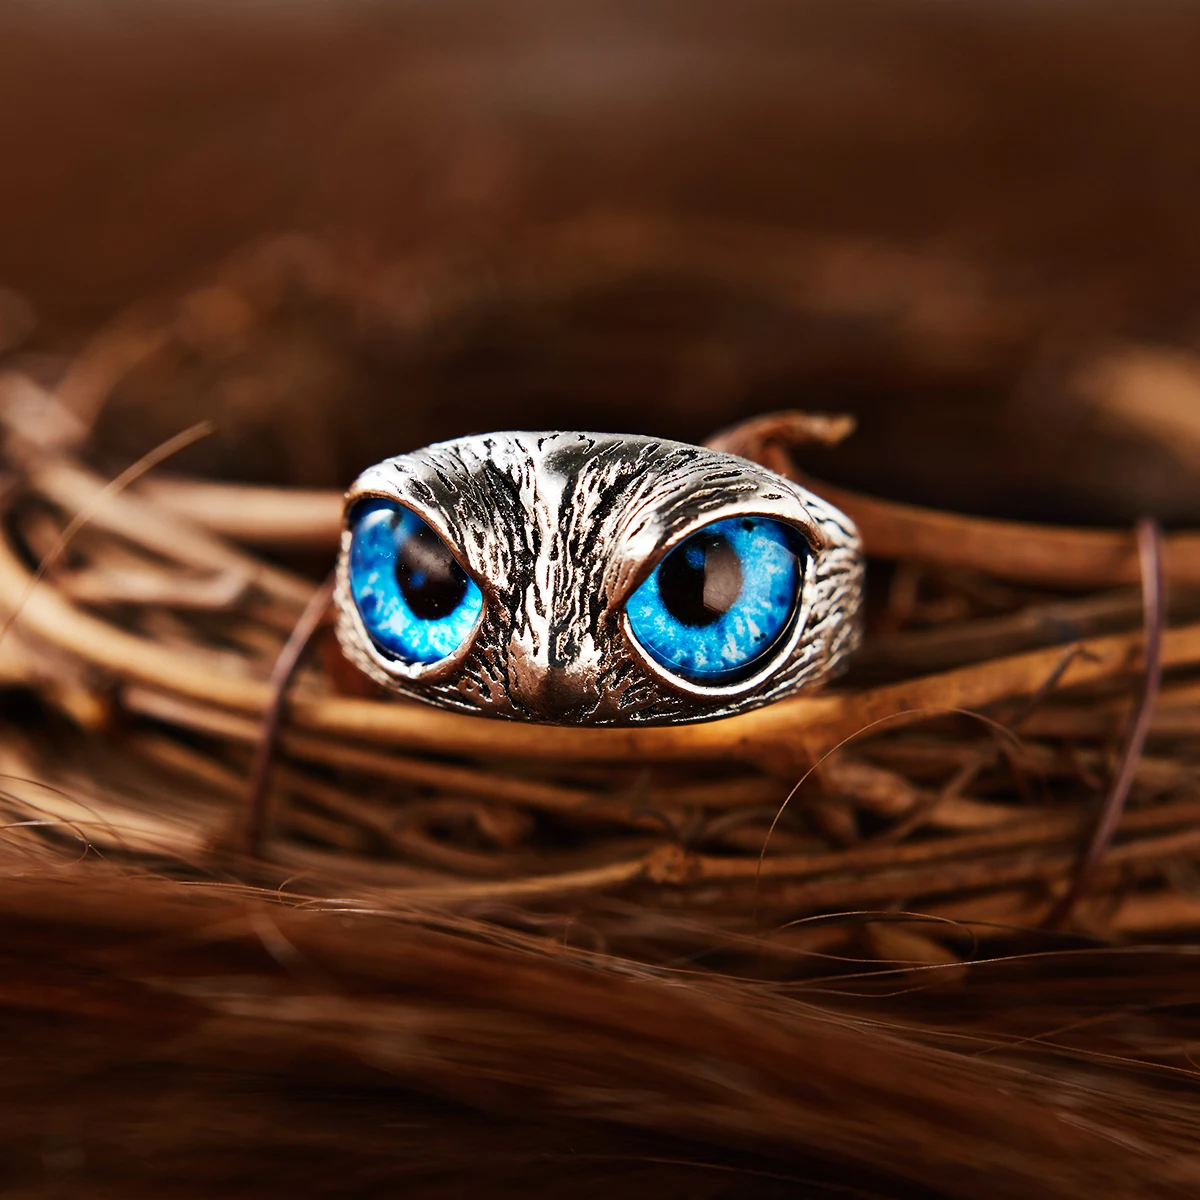 

Charm Vintage Blue Demon Eye Owl Ring For Women Lovers Punk Retro Animal Open Adjustable Ring Statement Creative Jewelry Gift